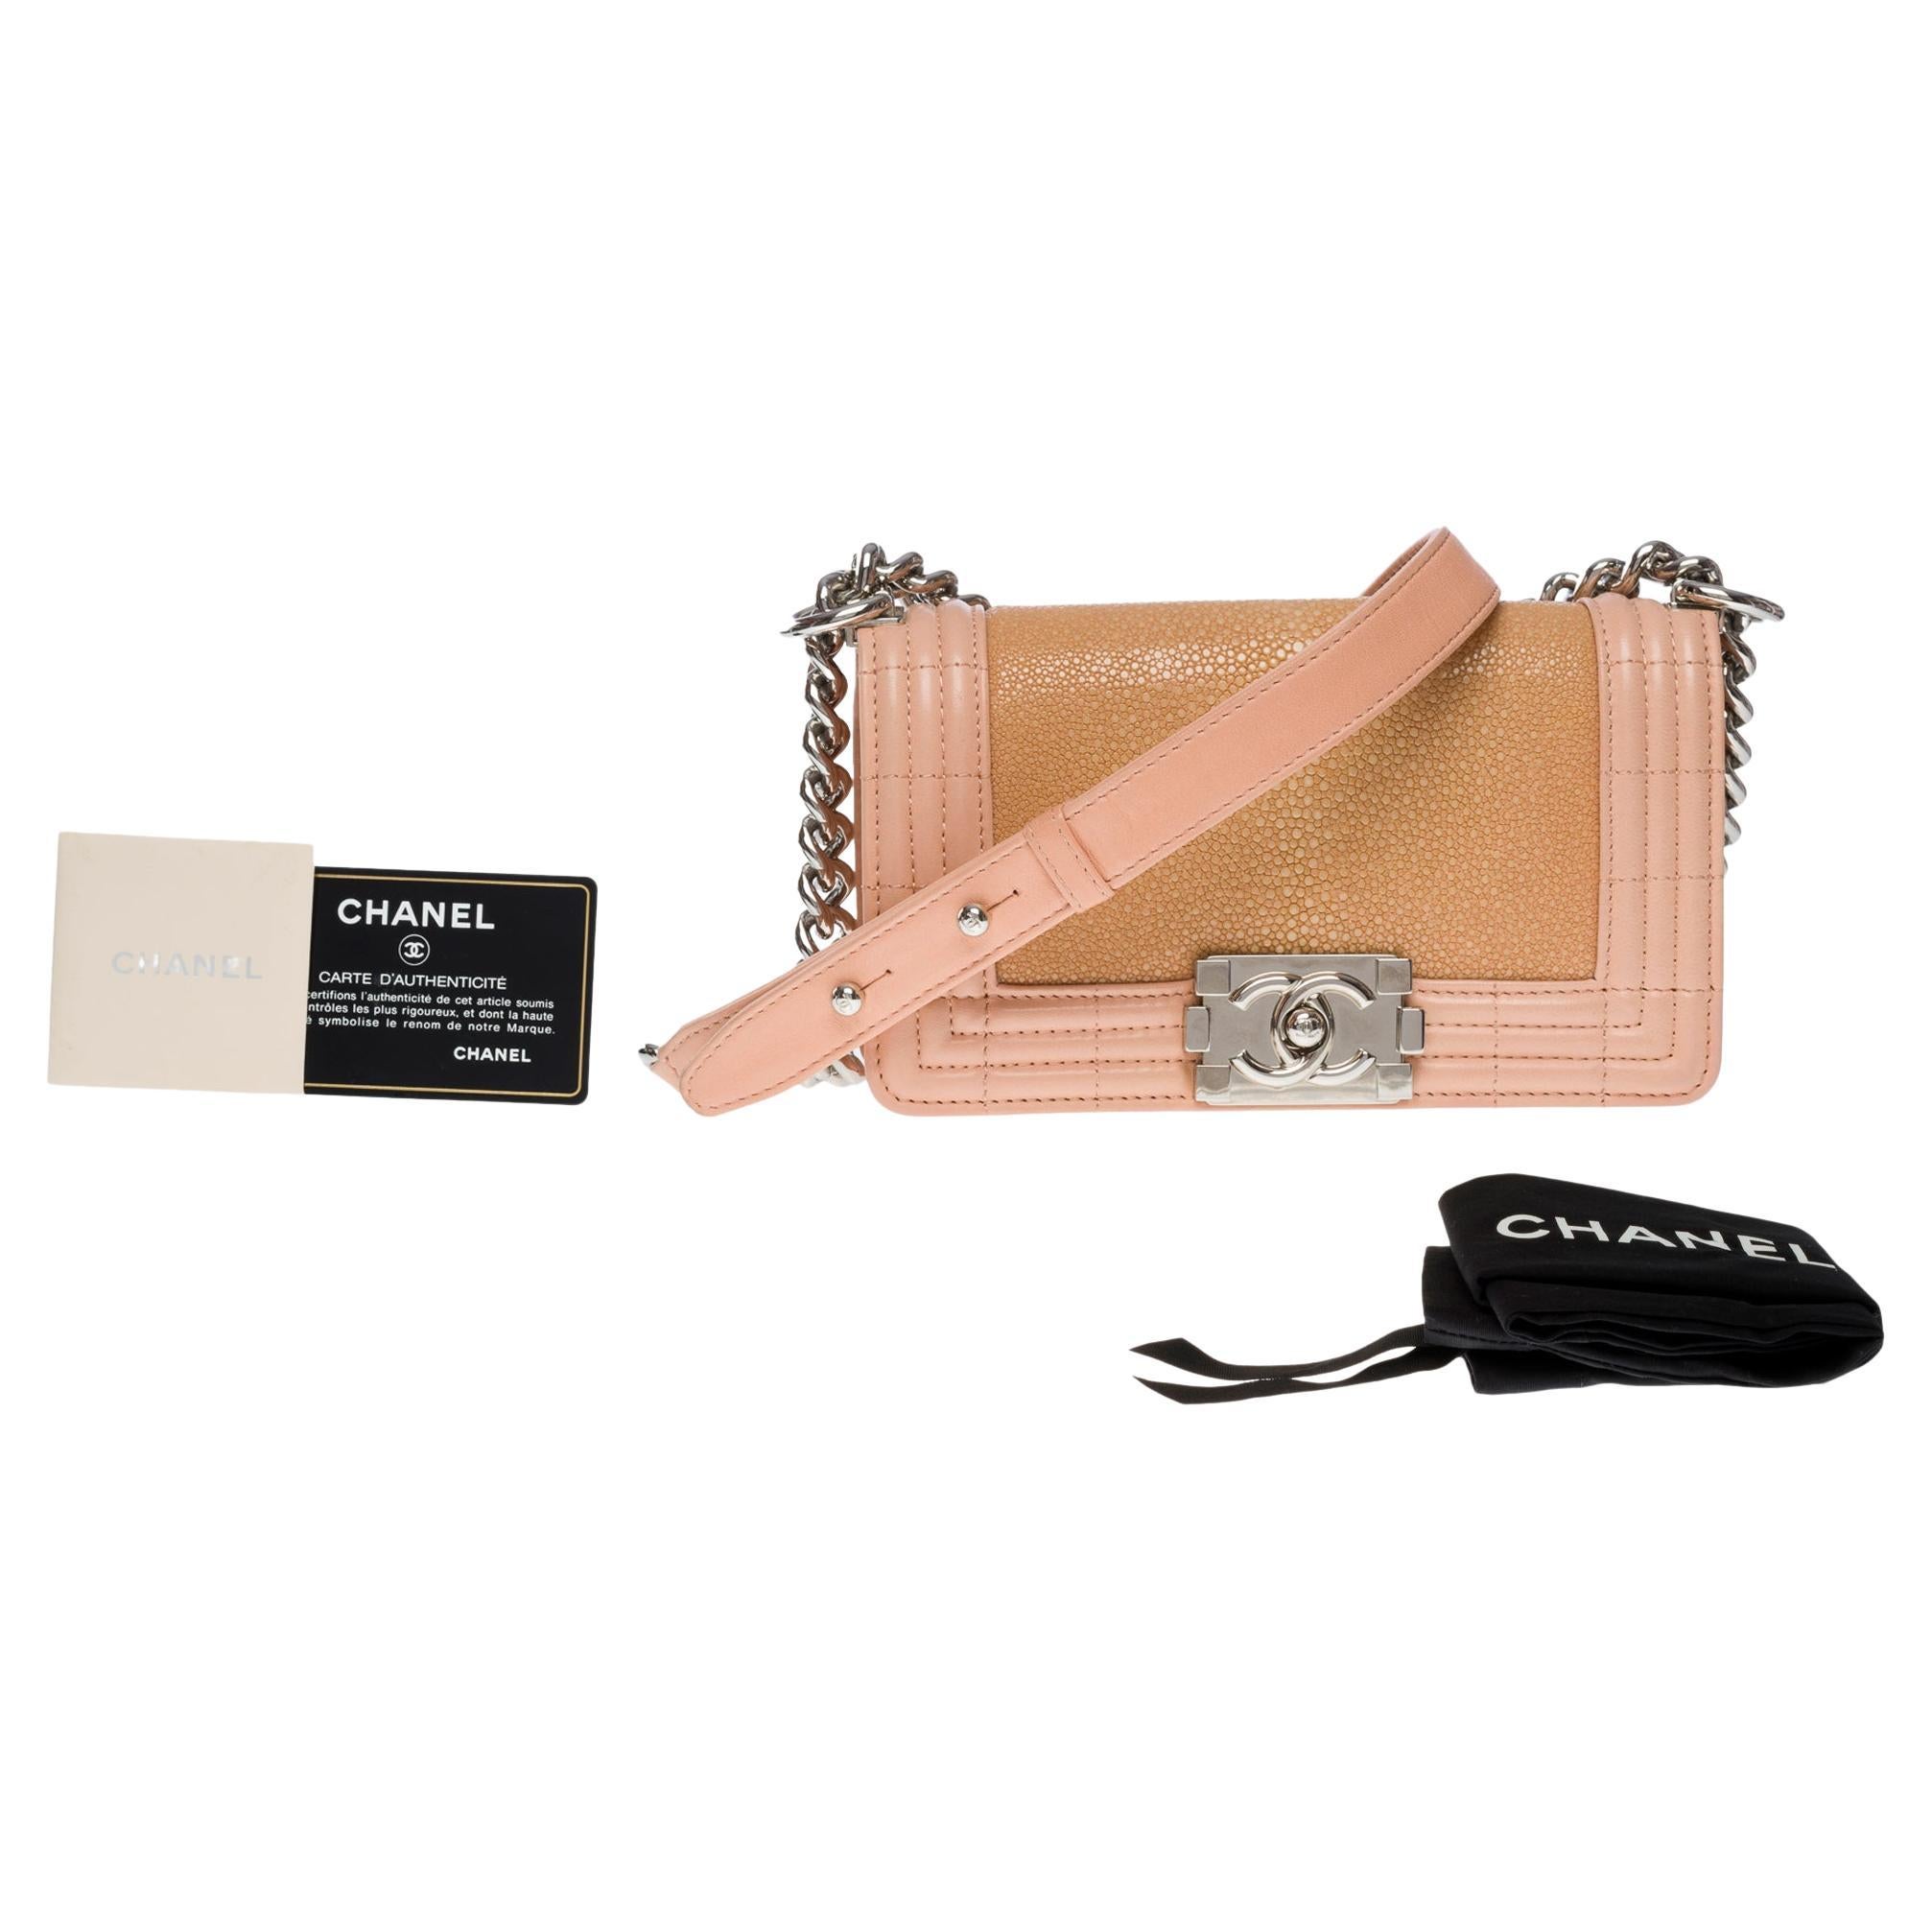 Limited Edition Chanel Boy Mini shoulder bag in Pink shagreen and leather, SHW For Sale